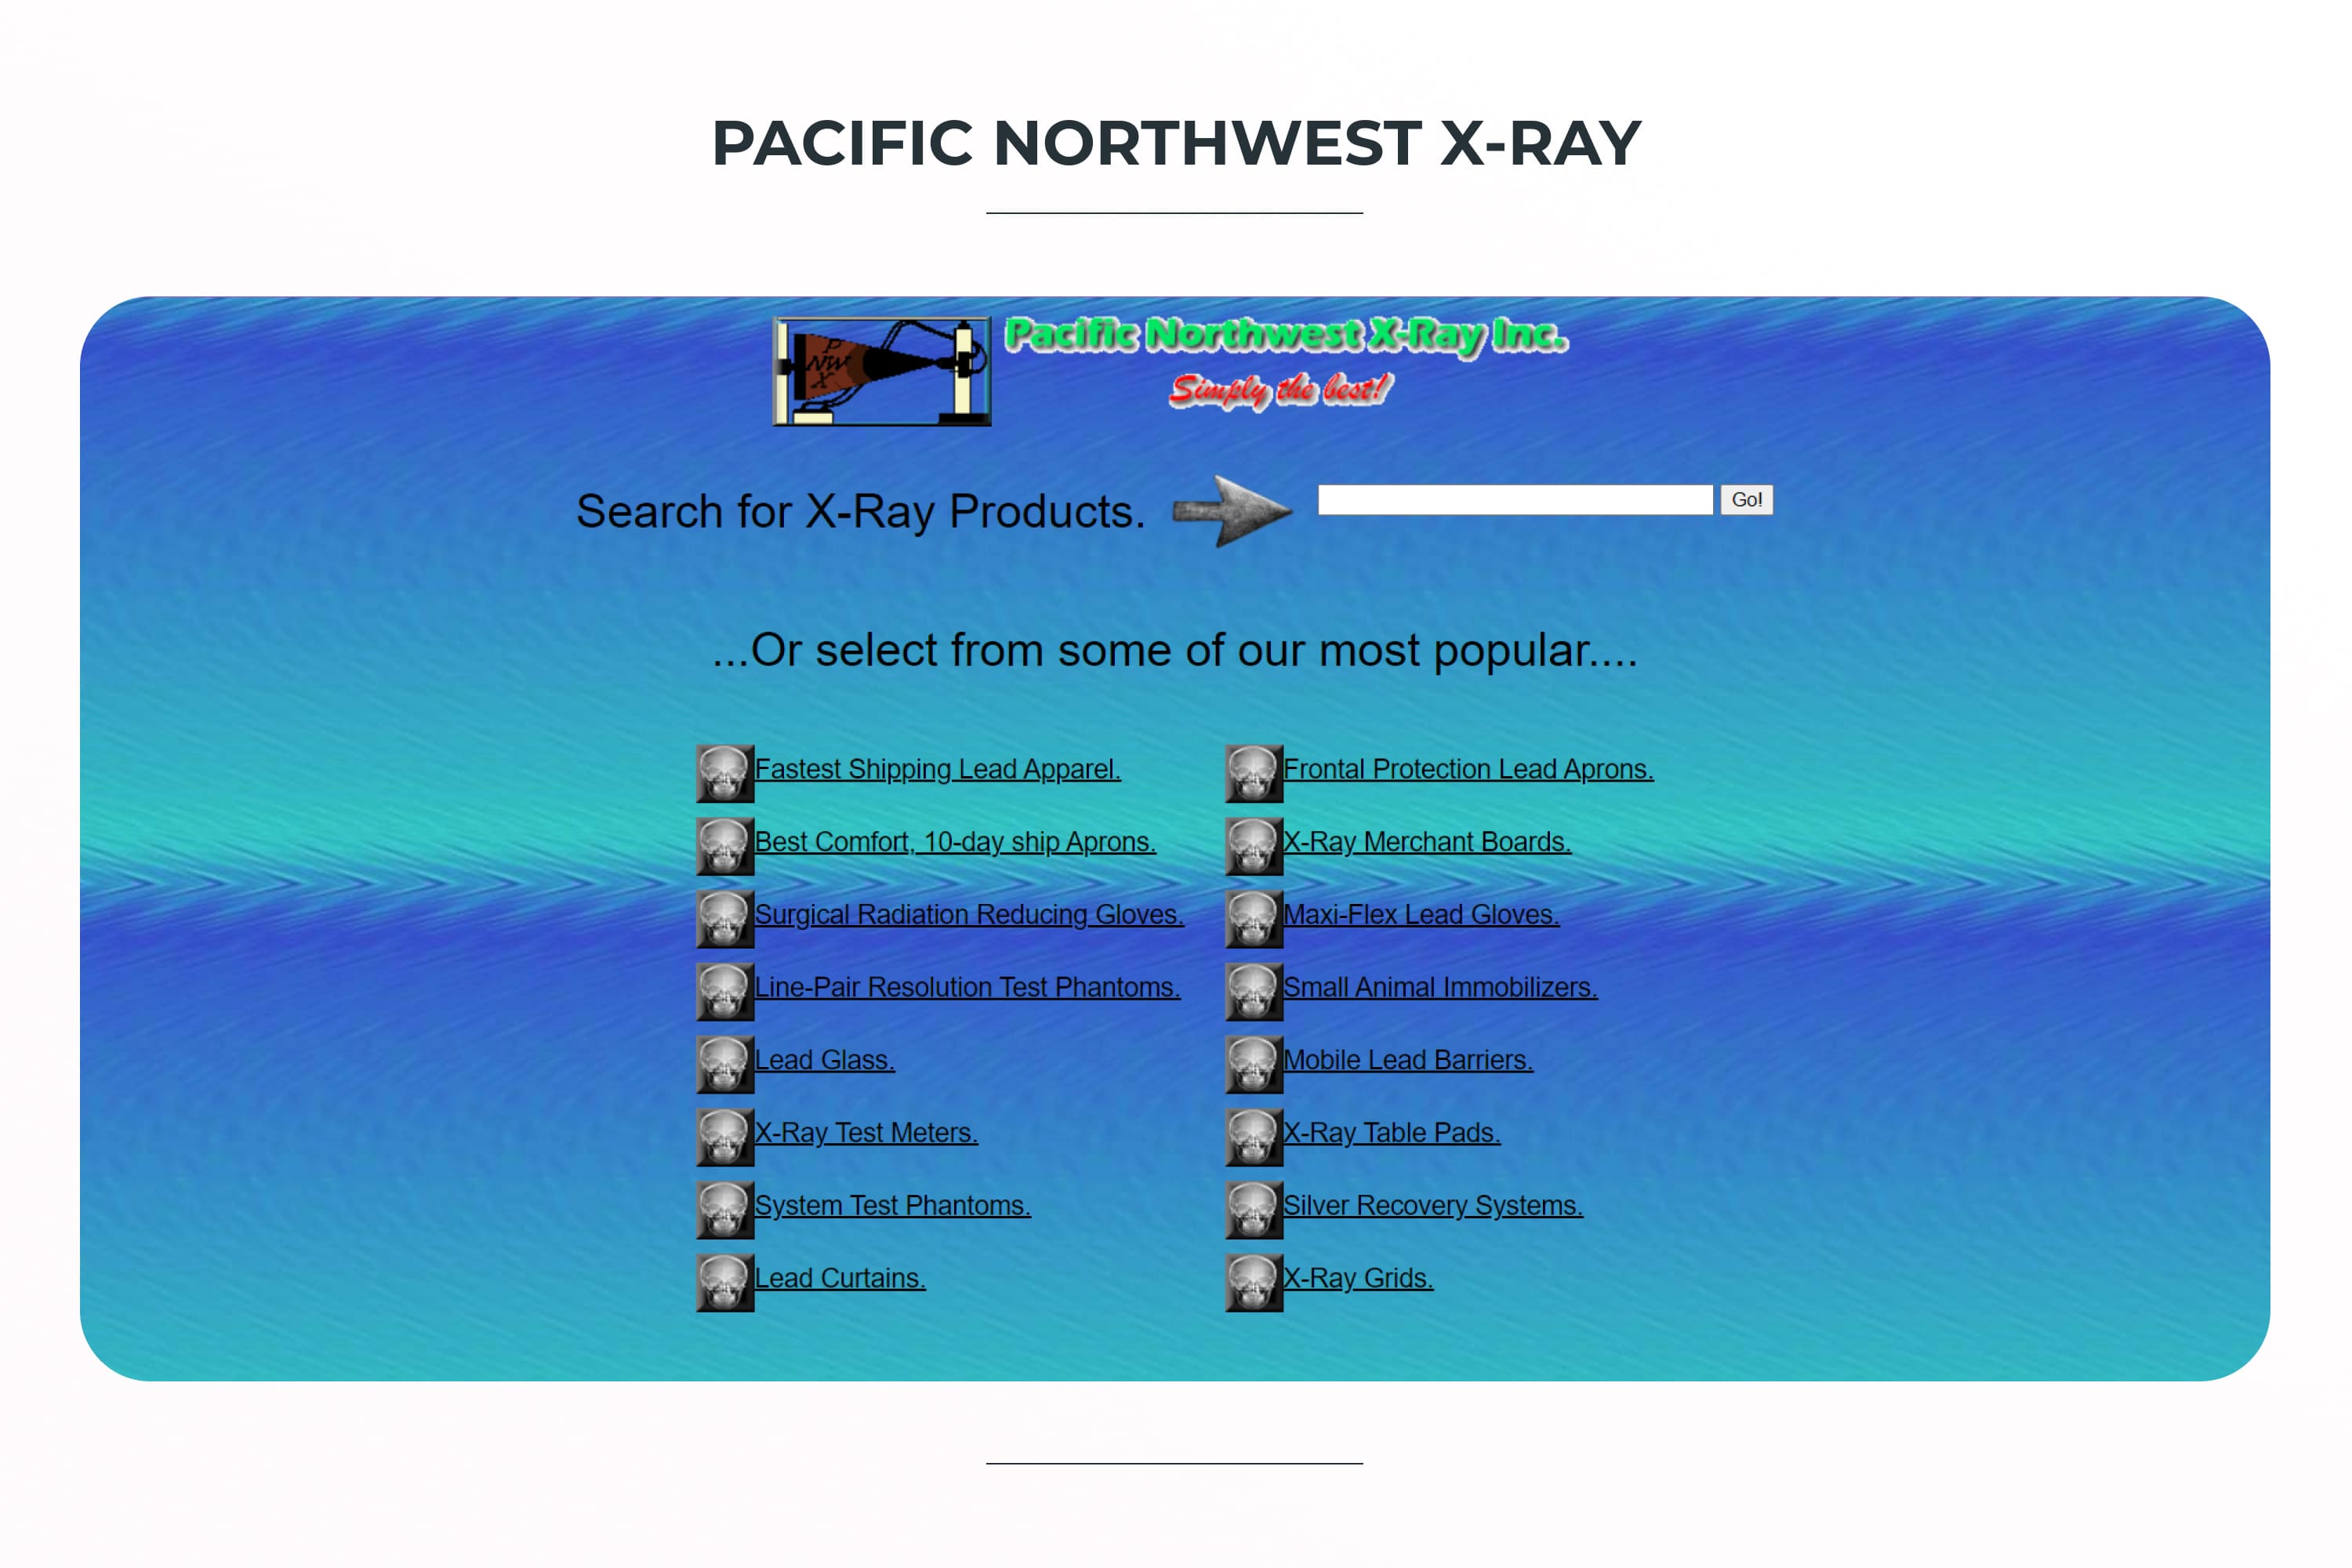 Main page of the Pacific Northwest X-Ray website.